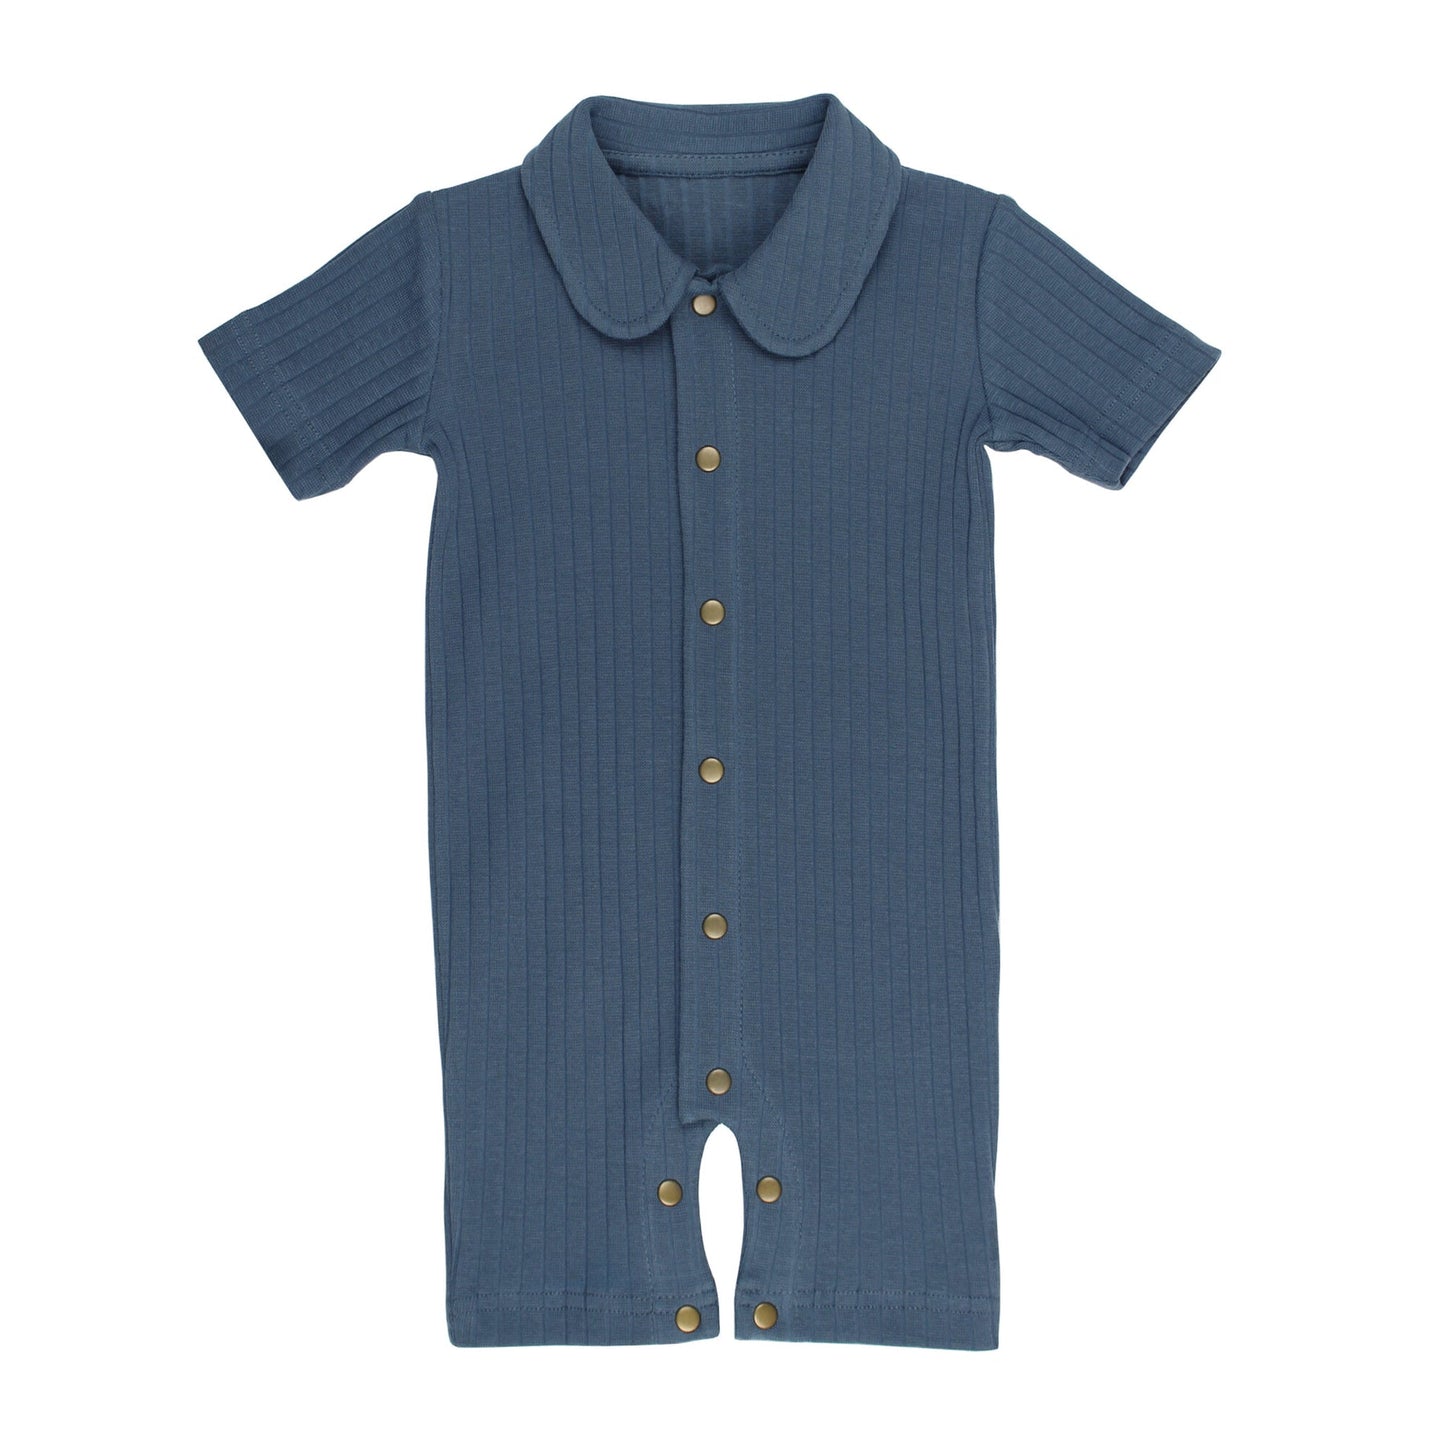 L'oved Baby 'Dolphin' Ribbed Coverall Onesie